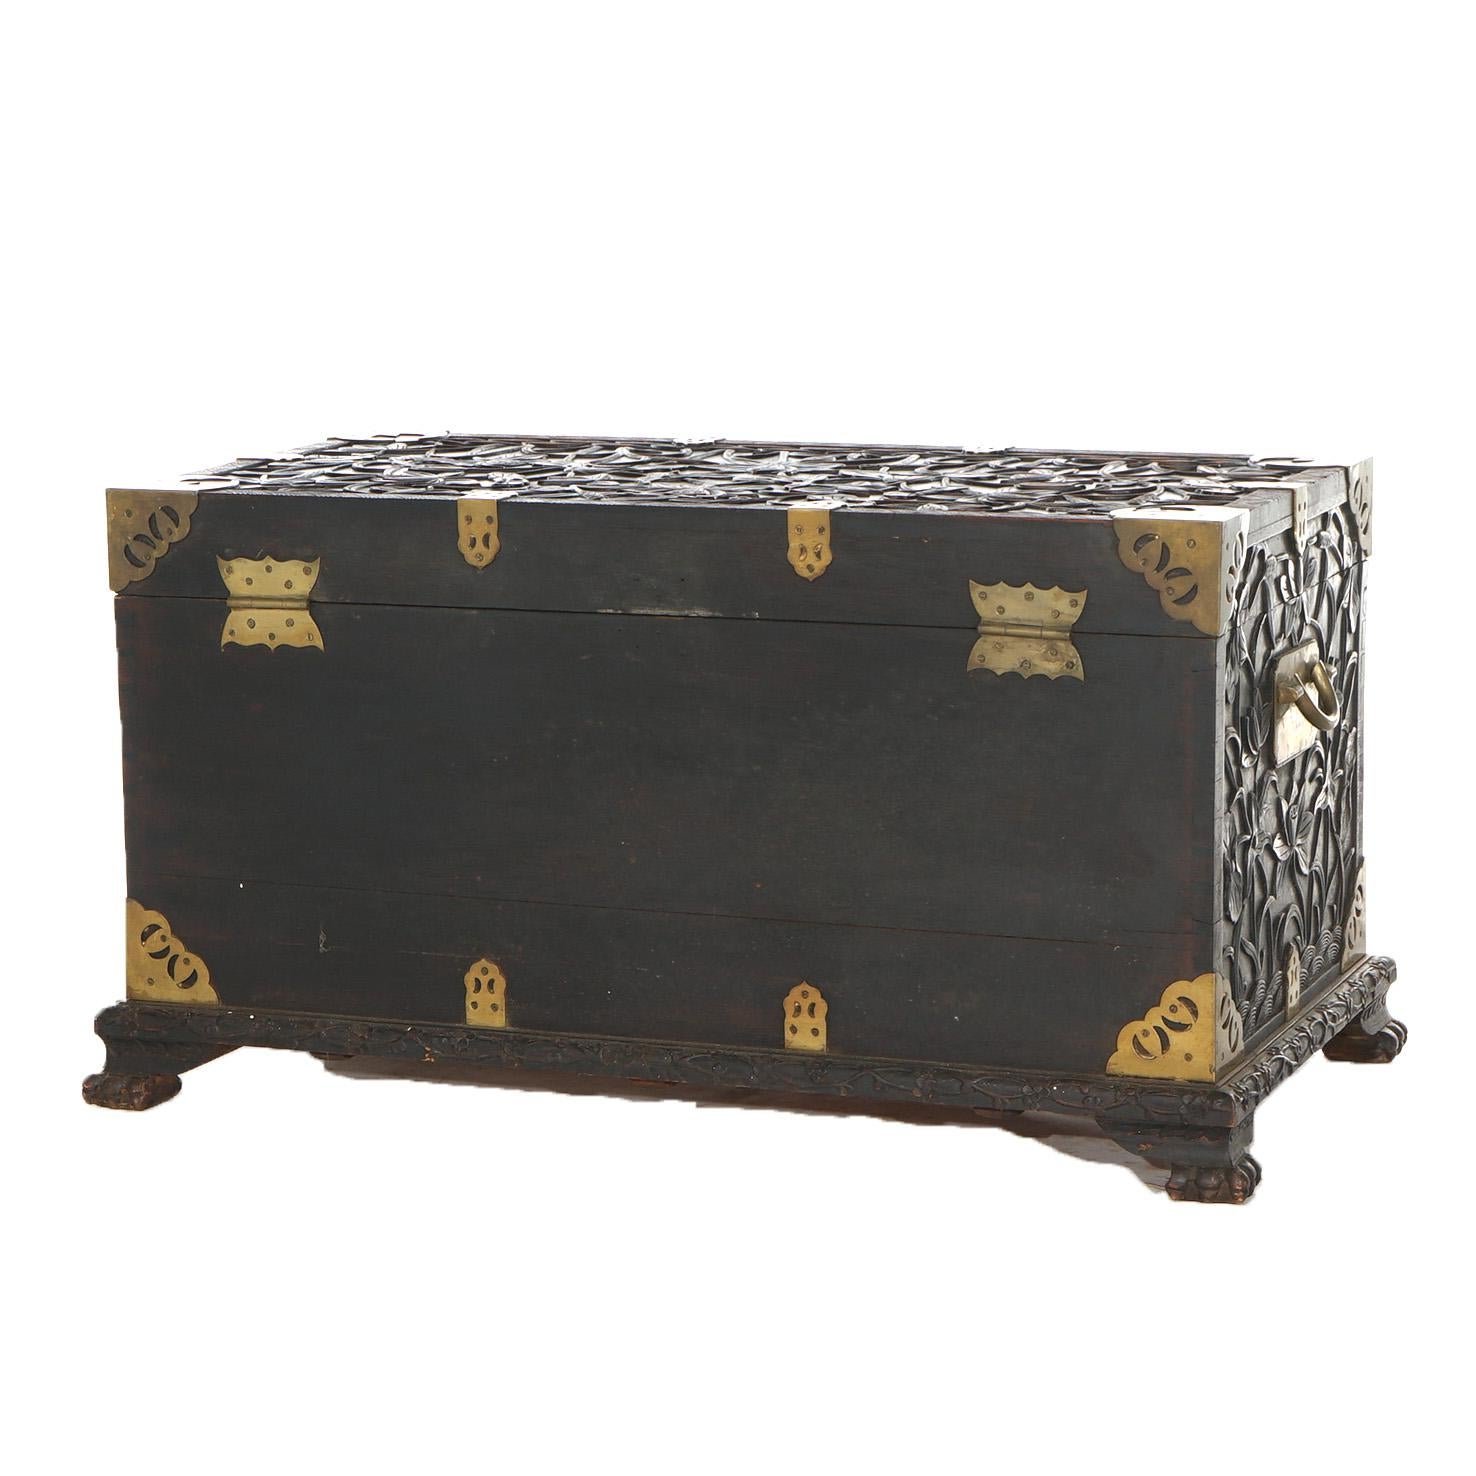 Antique Chinese Blanket Wedding Chest Carved in Relief with Floral Design C1890 For Sale 4